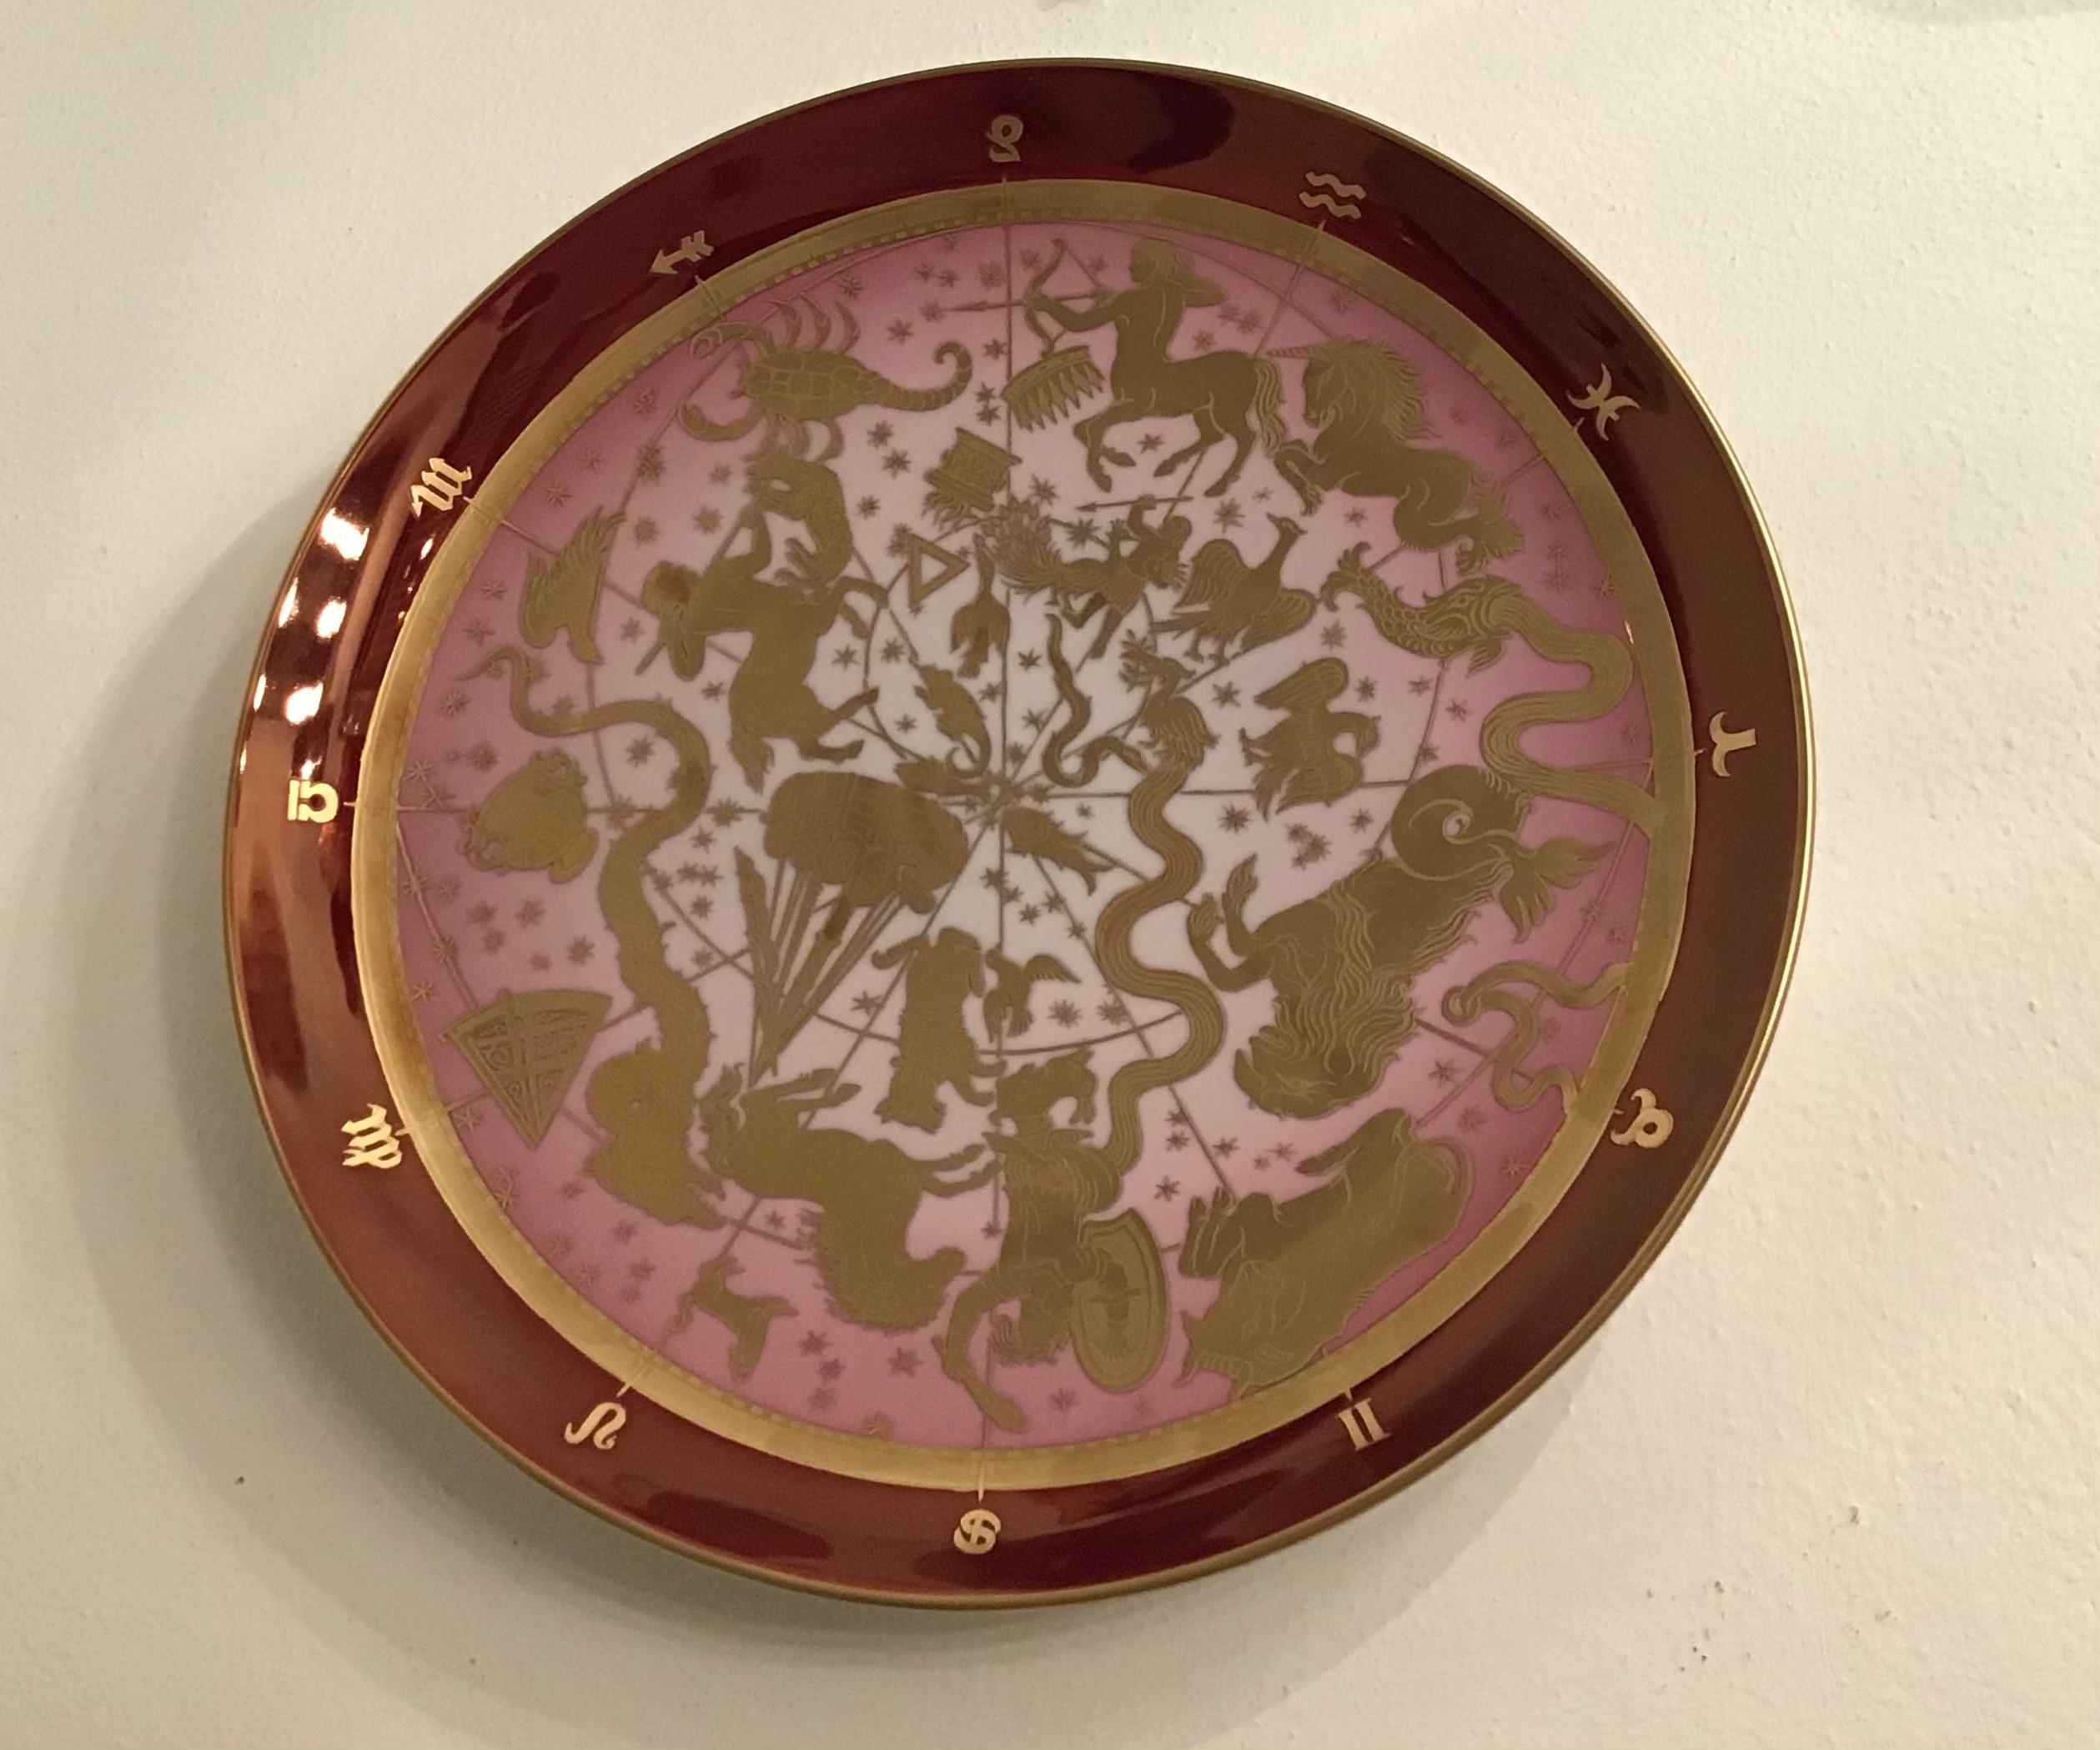 Morbelli Porcelain Wall Plate “Planisfero Celeste“ Worked with Pure Gold 1960 IT For Sale 1